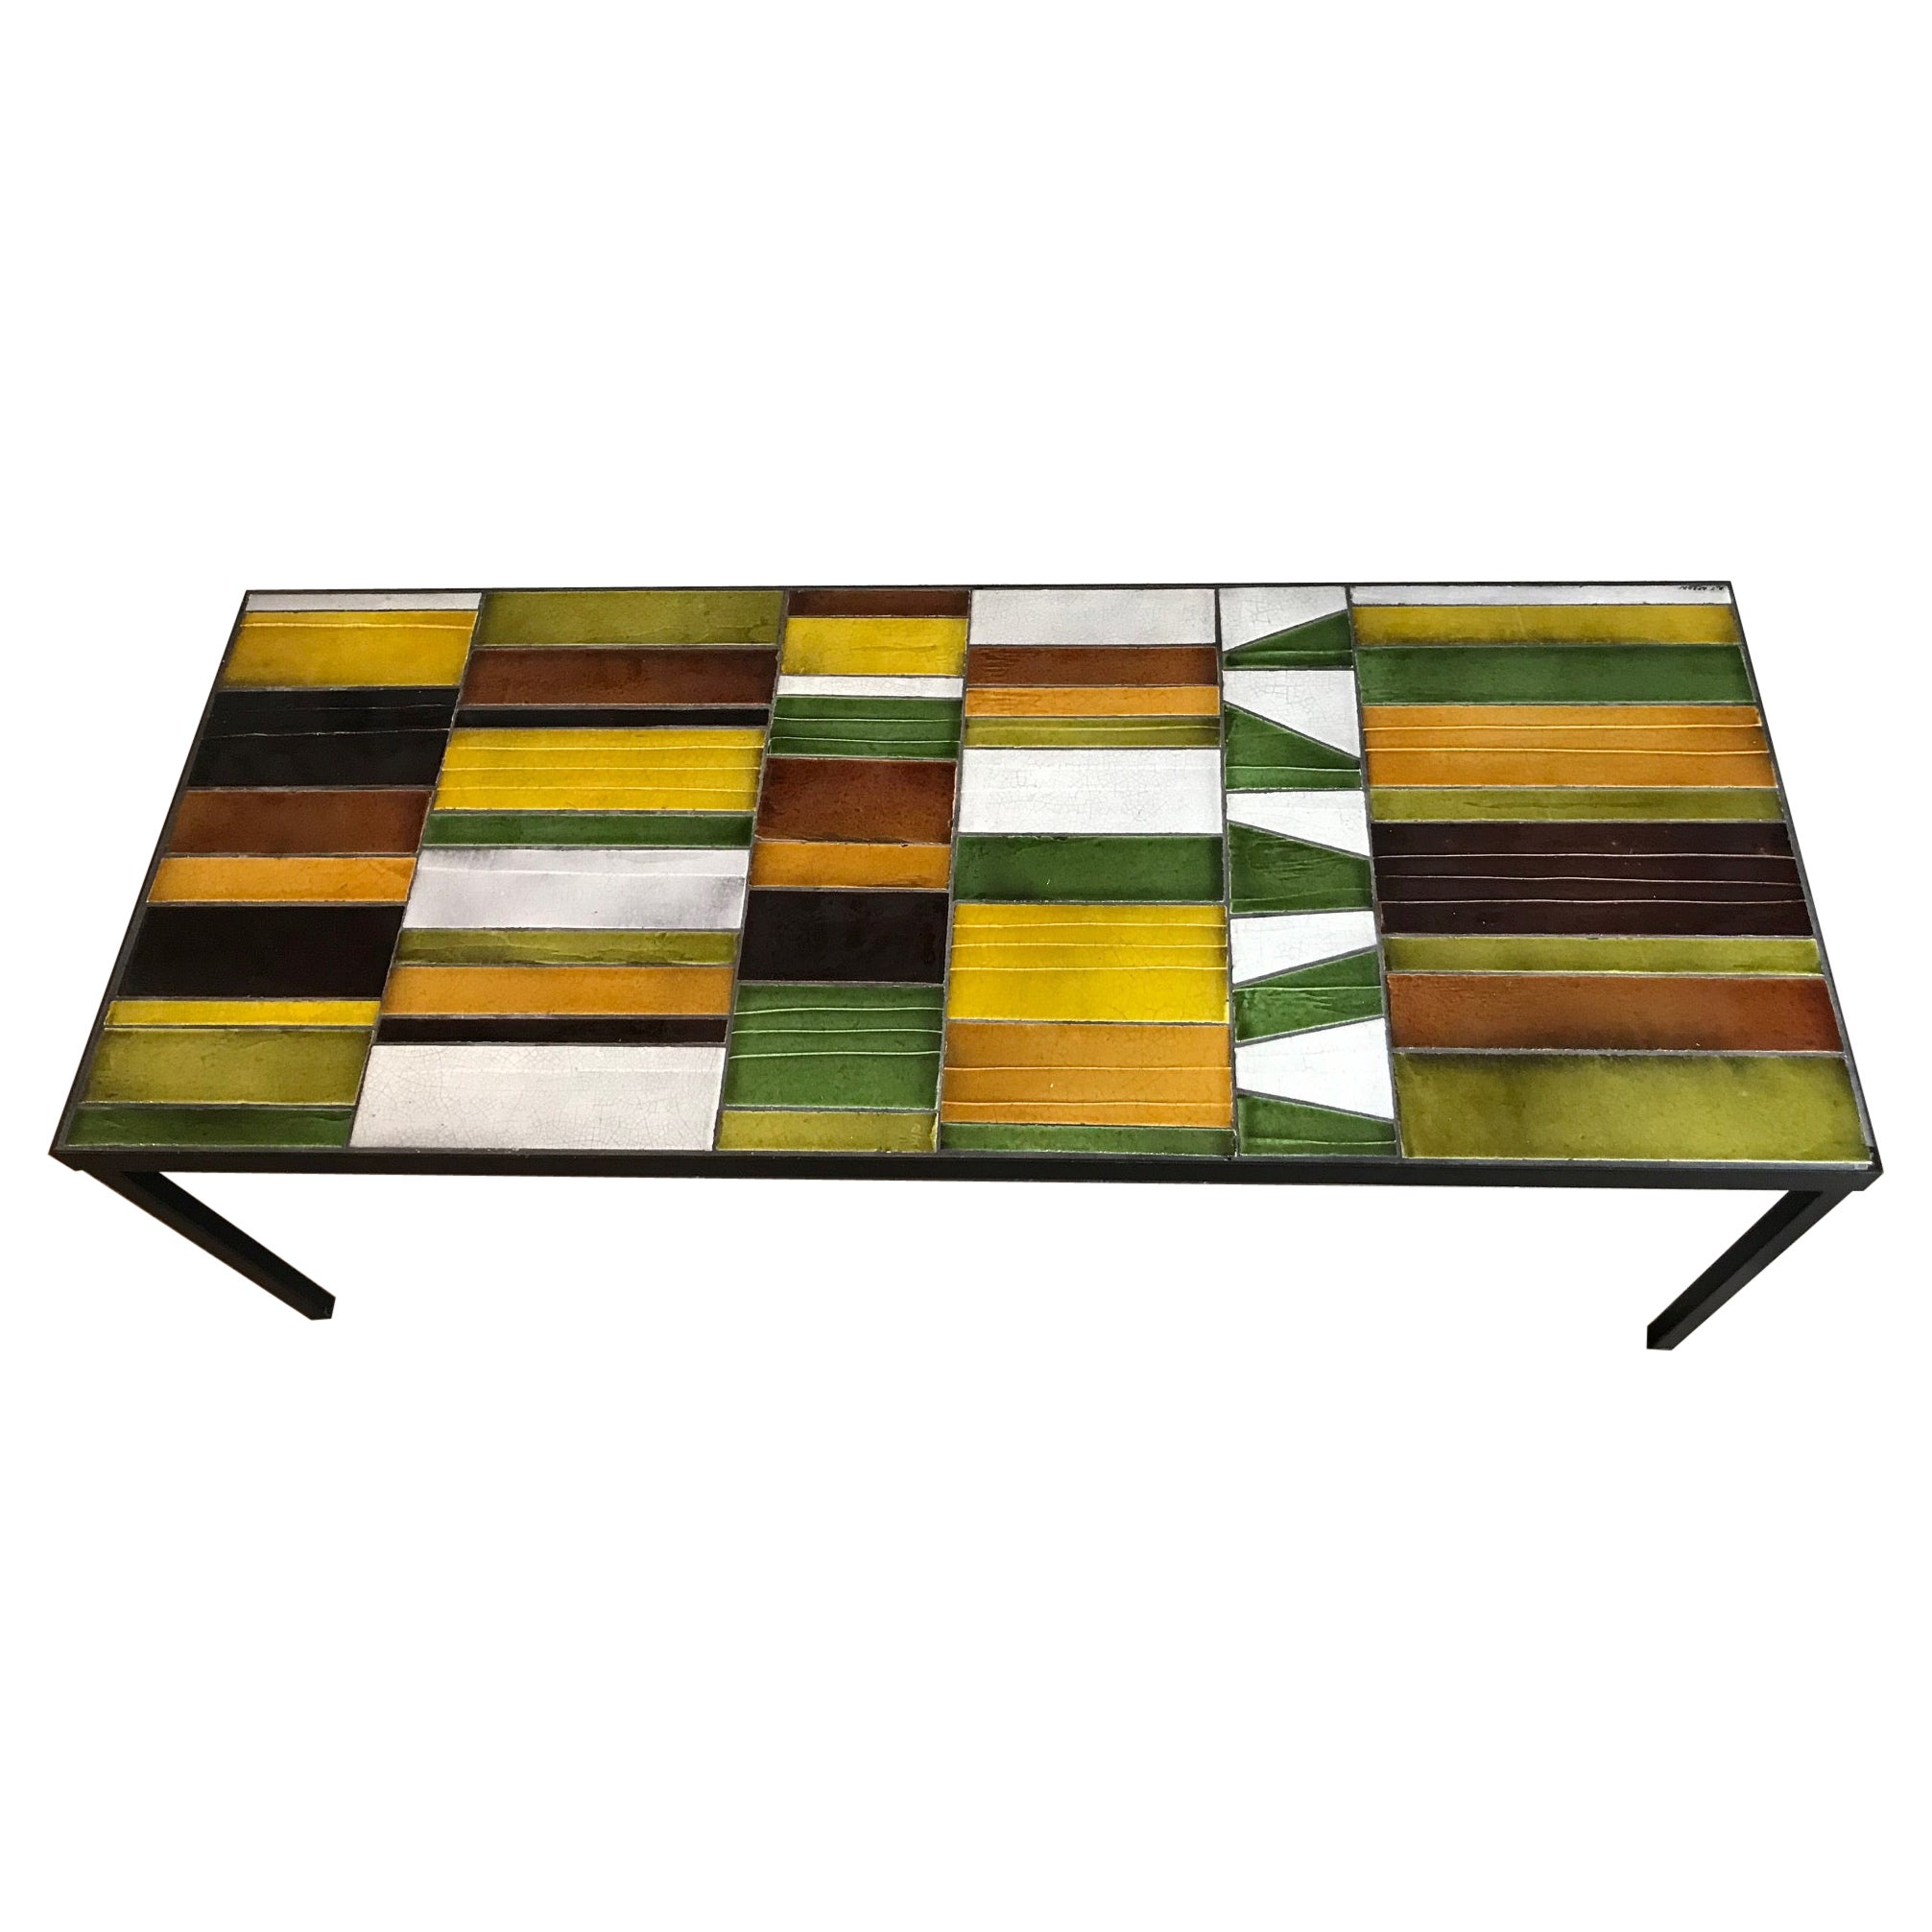 Ceramic Coffee Table by Roger Capron, Vallauris, France, 1960s